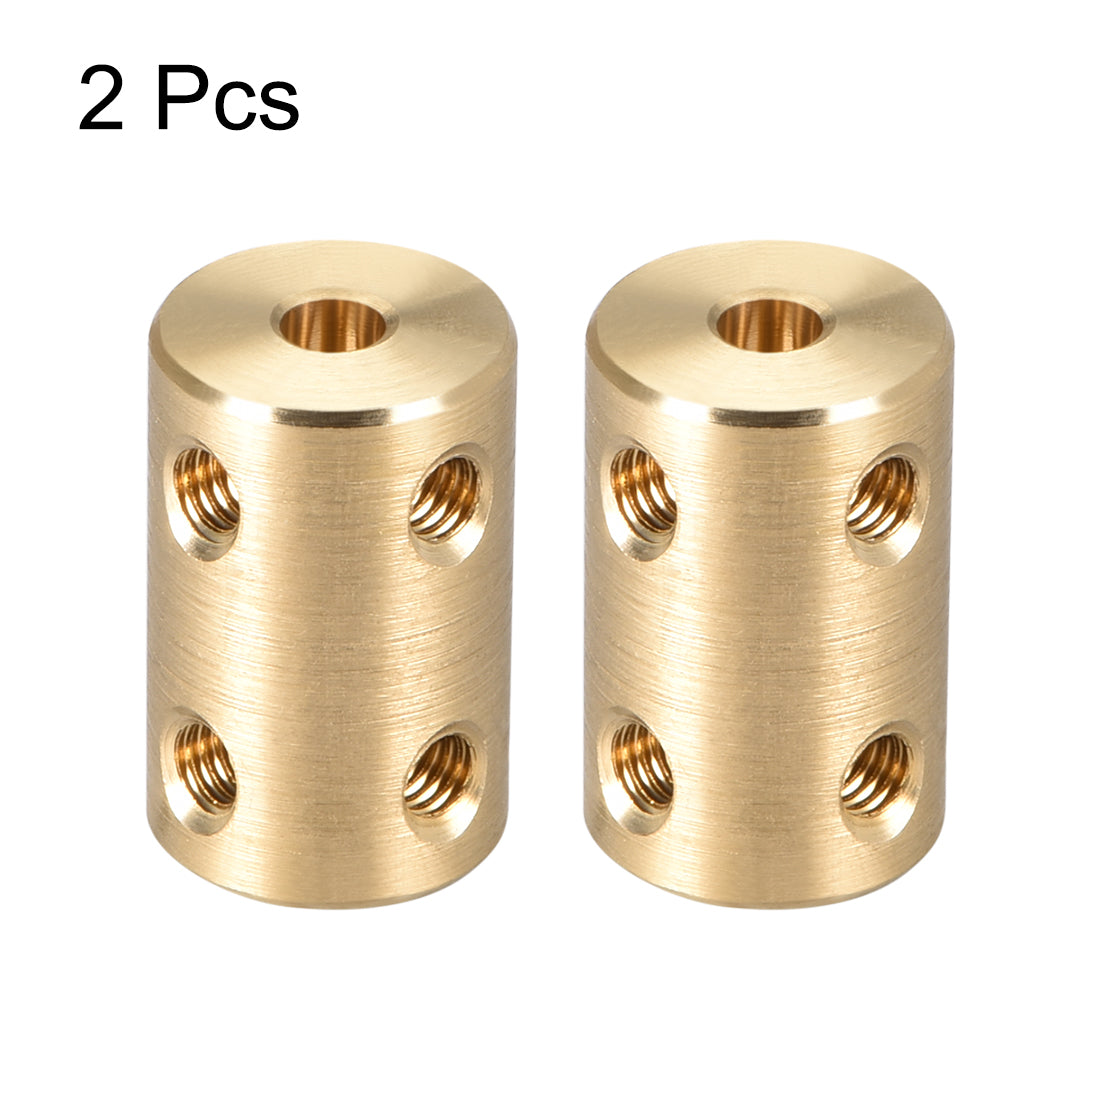 uxcell Uxcell Shaft Coupling 4mm to 4mm Bore L22xD14 Robot Motor Wheel Rigid Coupler Connector Gold Tone 2 Pcs